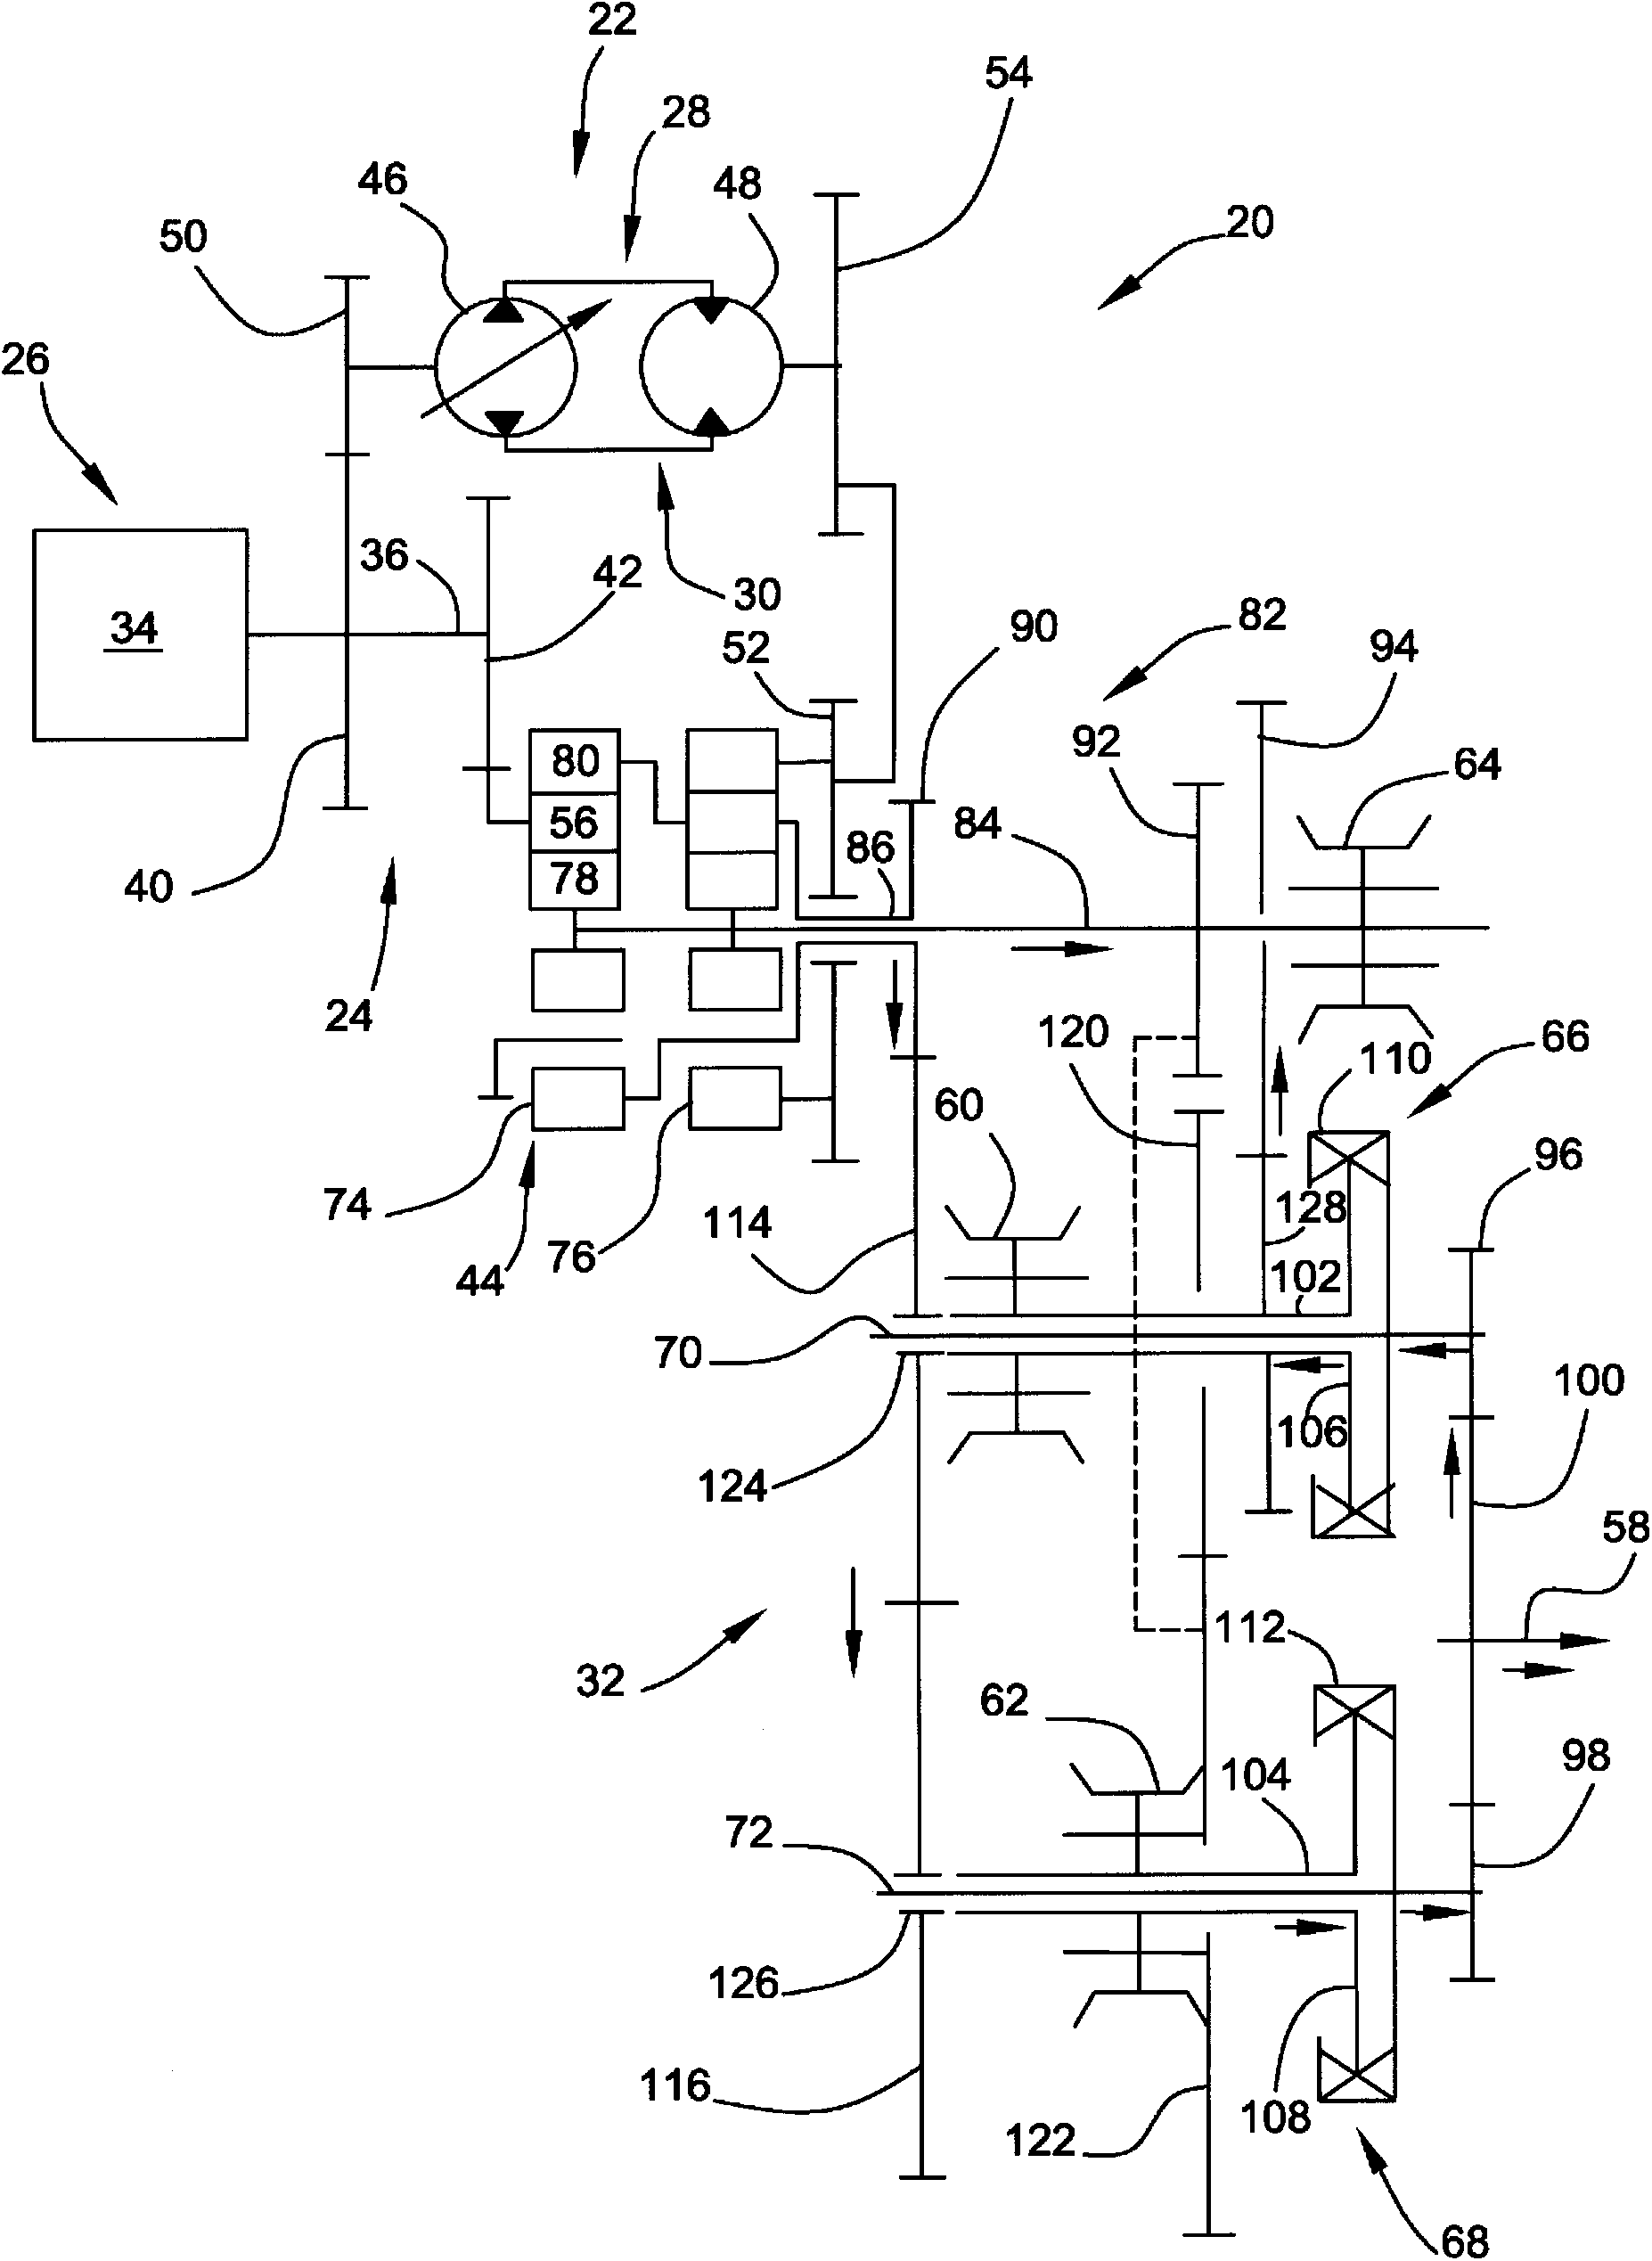 Method of synchronizing in split torque continuously variable dual clutch transmission